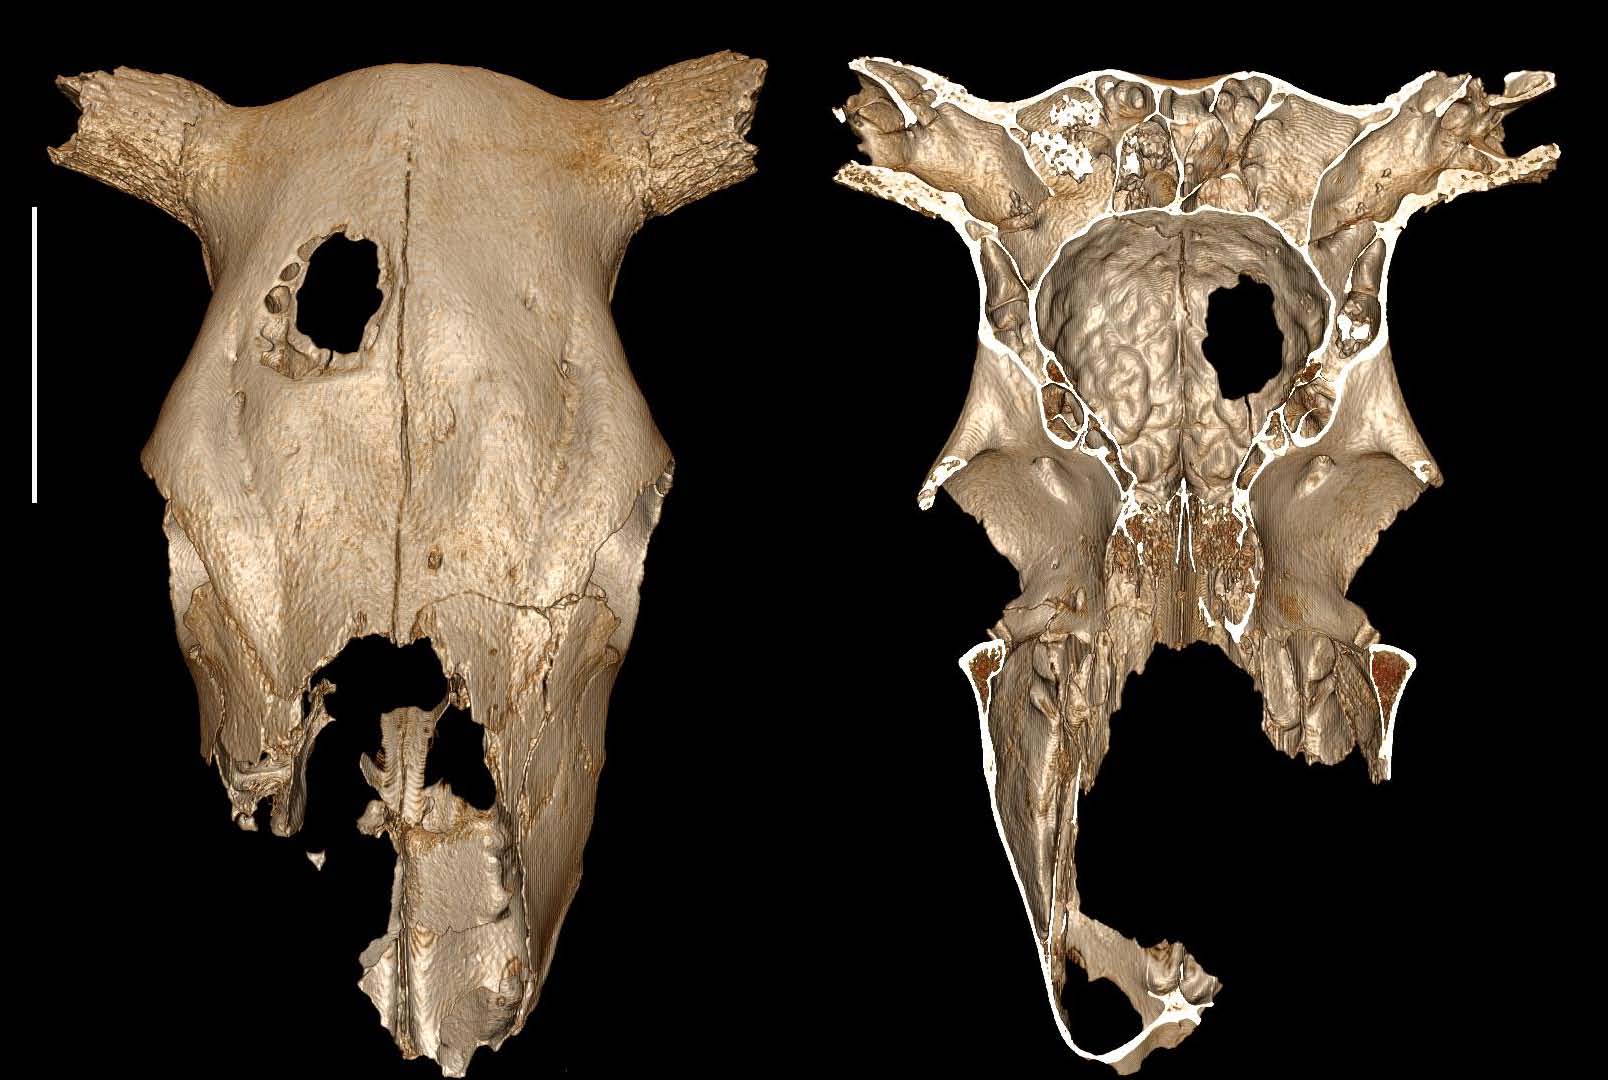 Neolithic surgeons might have practiced their skull-drilling techniques on cows